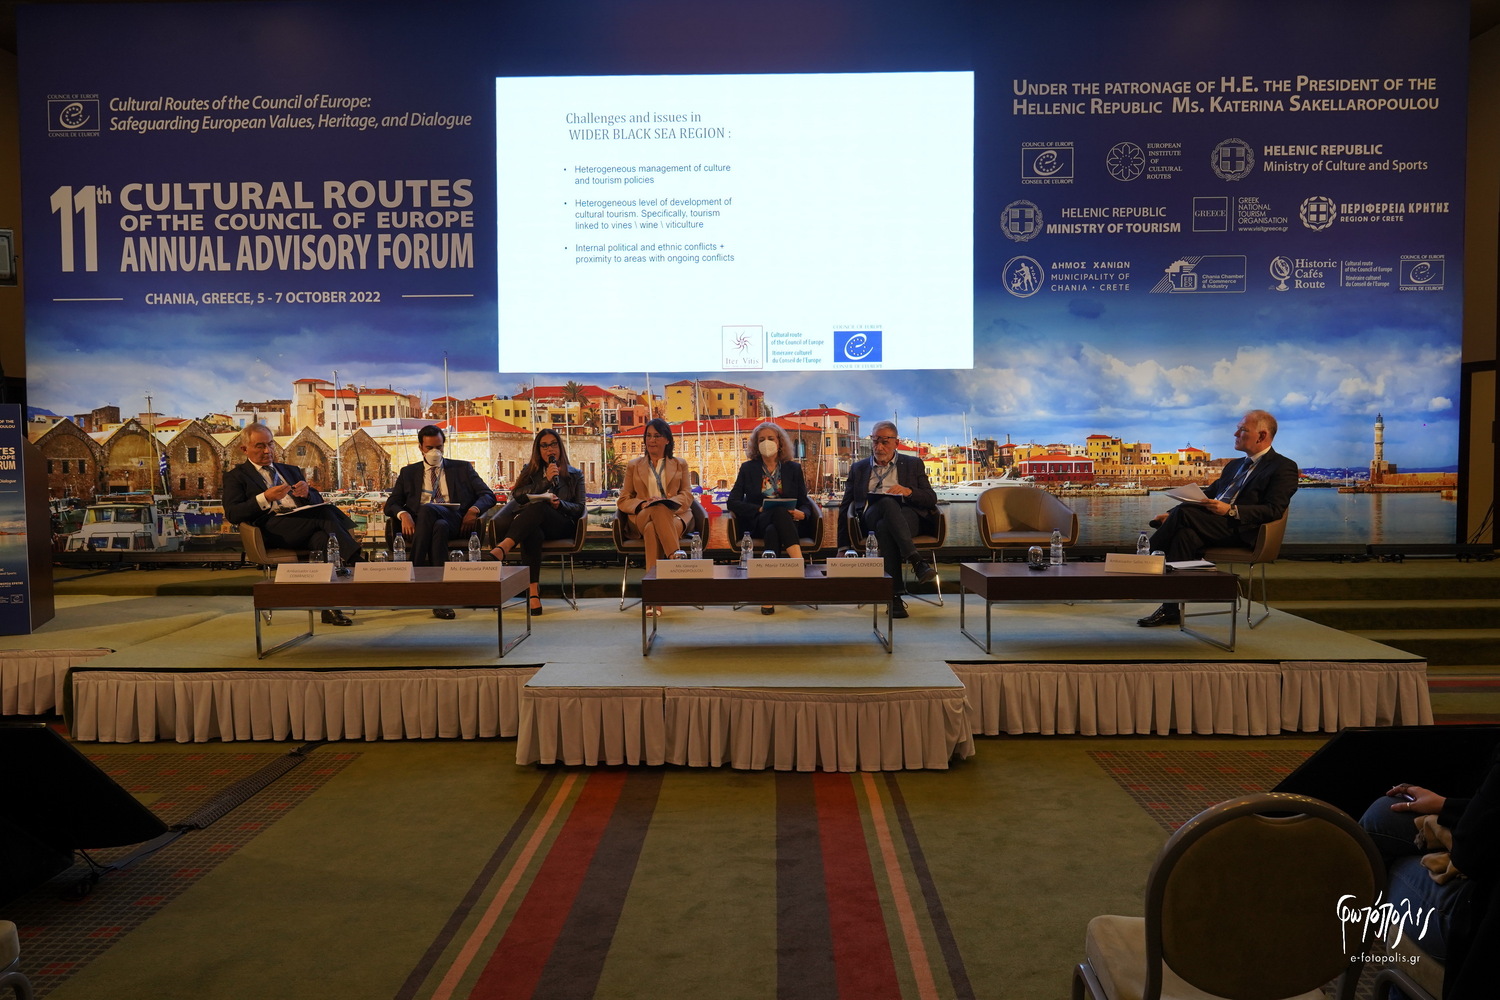 Thematic Session 2: Promoting Cultural Diplomacy in the wider Black Sea Region: the role of Cultural Routes